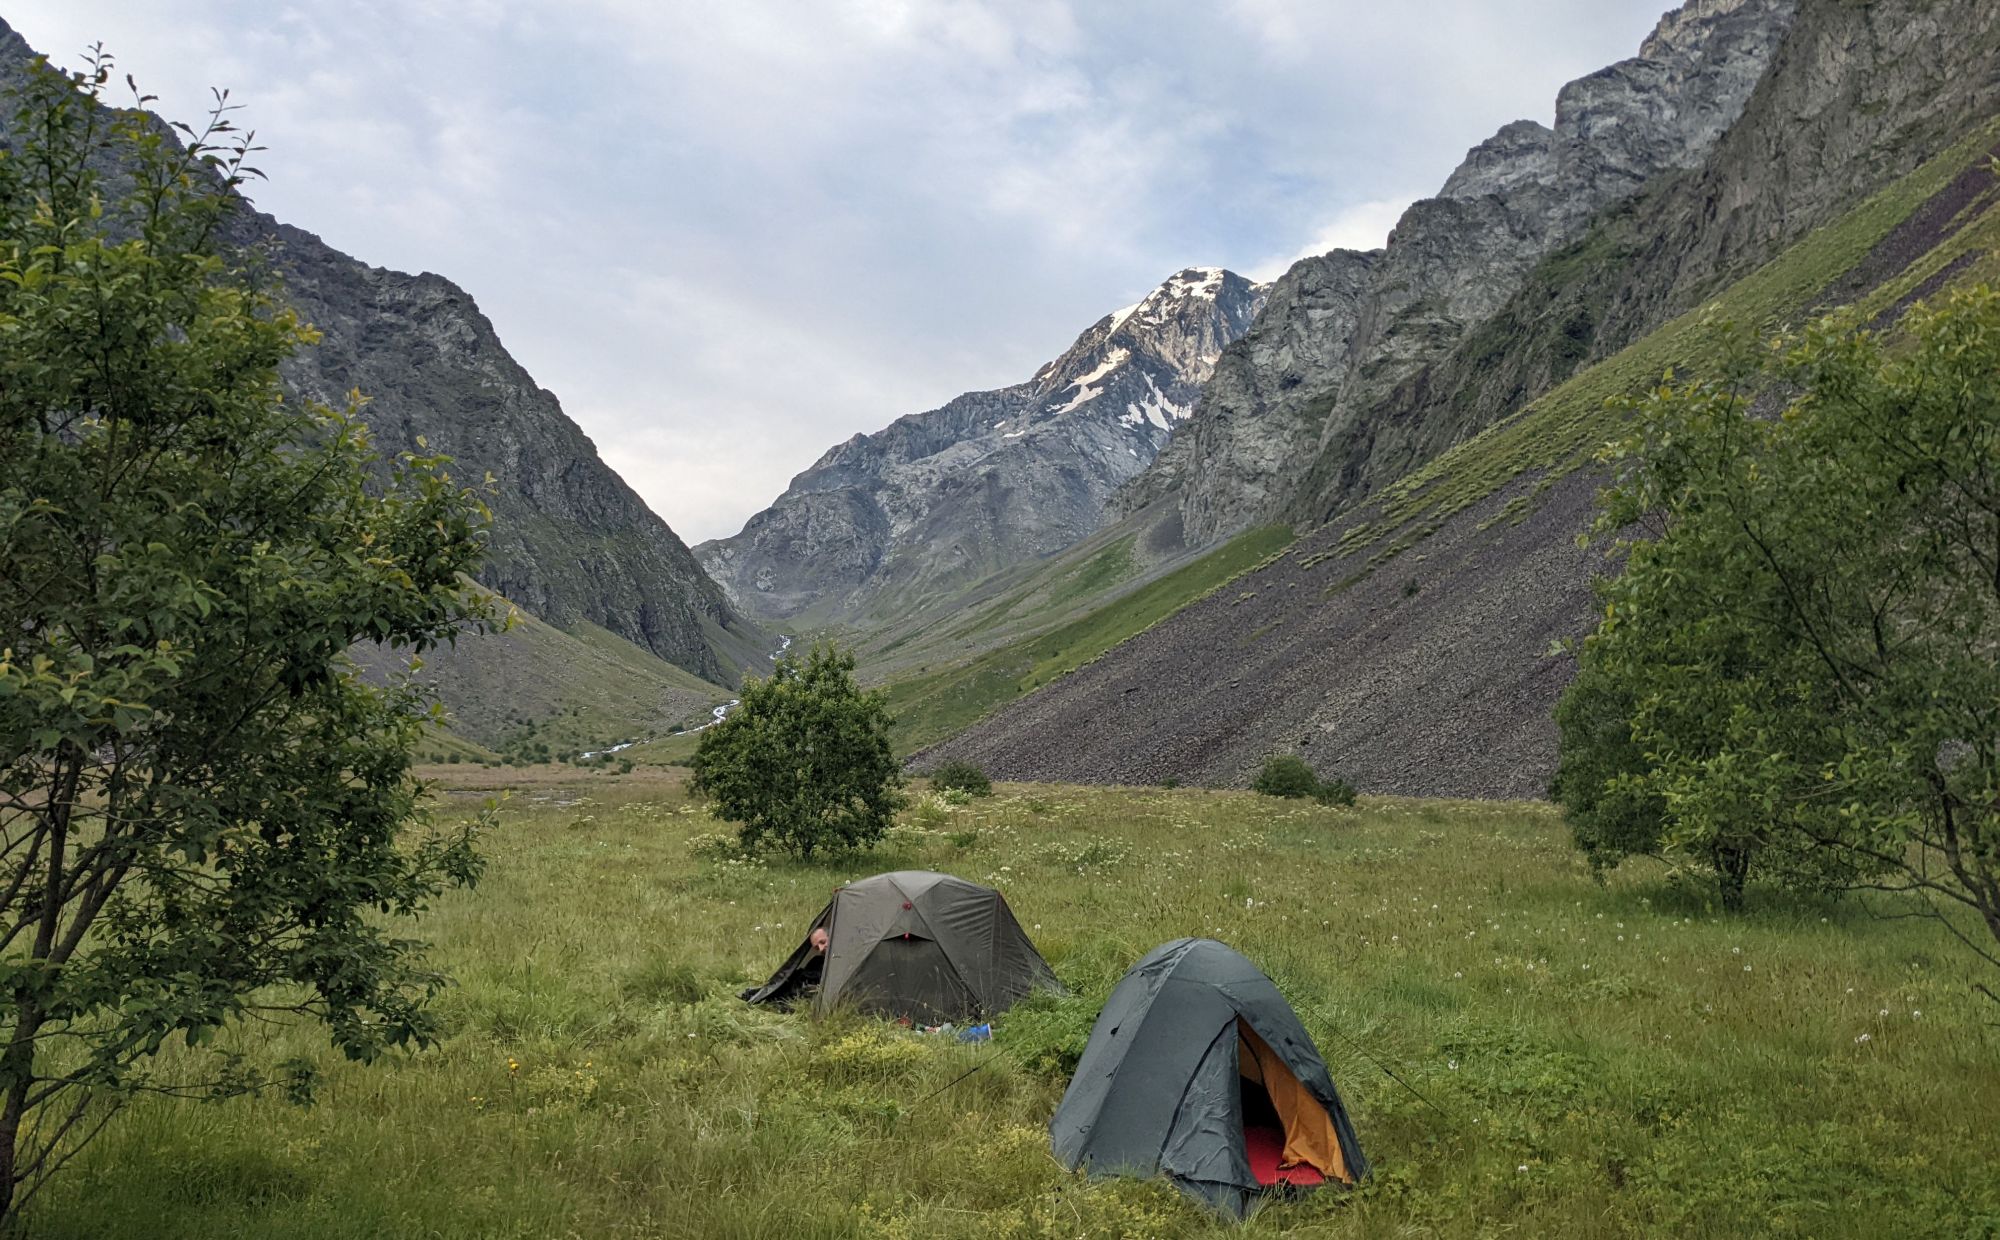 Camping in the Khde valley